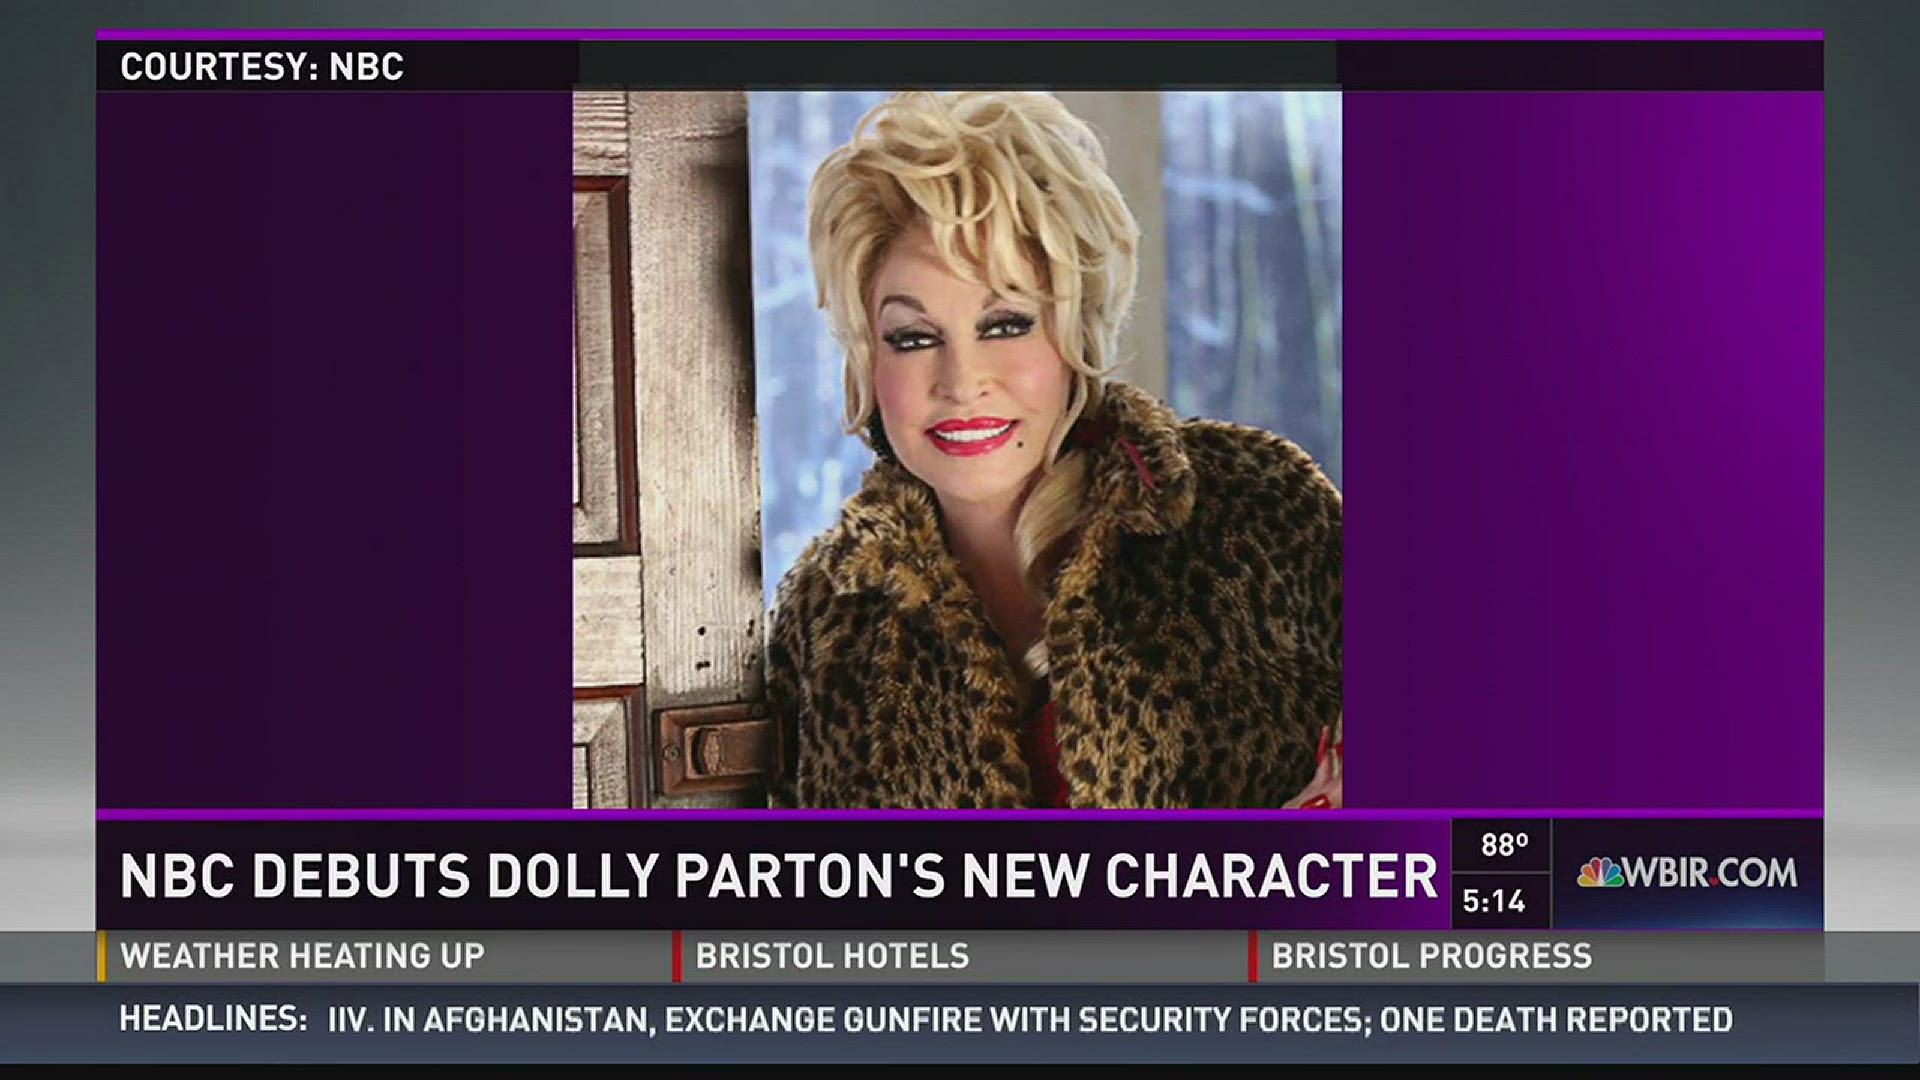 Dolly will play the "town trollop" that inspired her own look in her next NBC movie "Christmas of Many Colors."